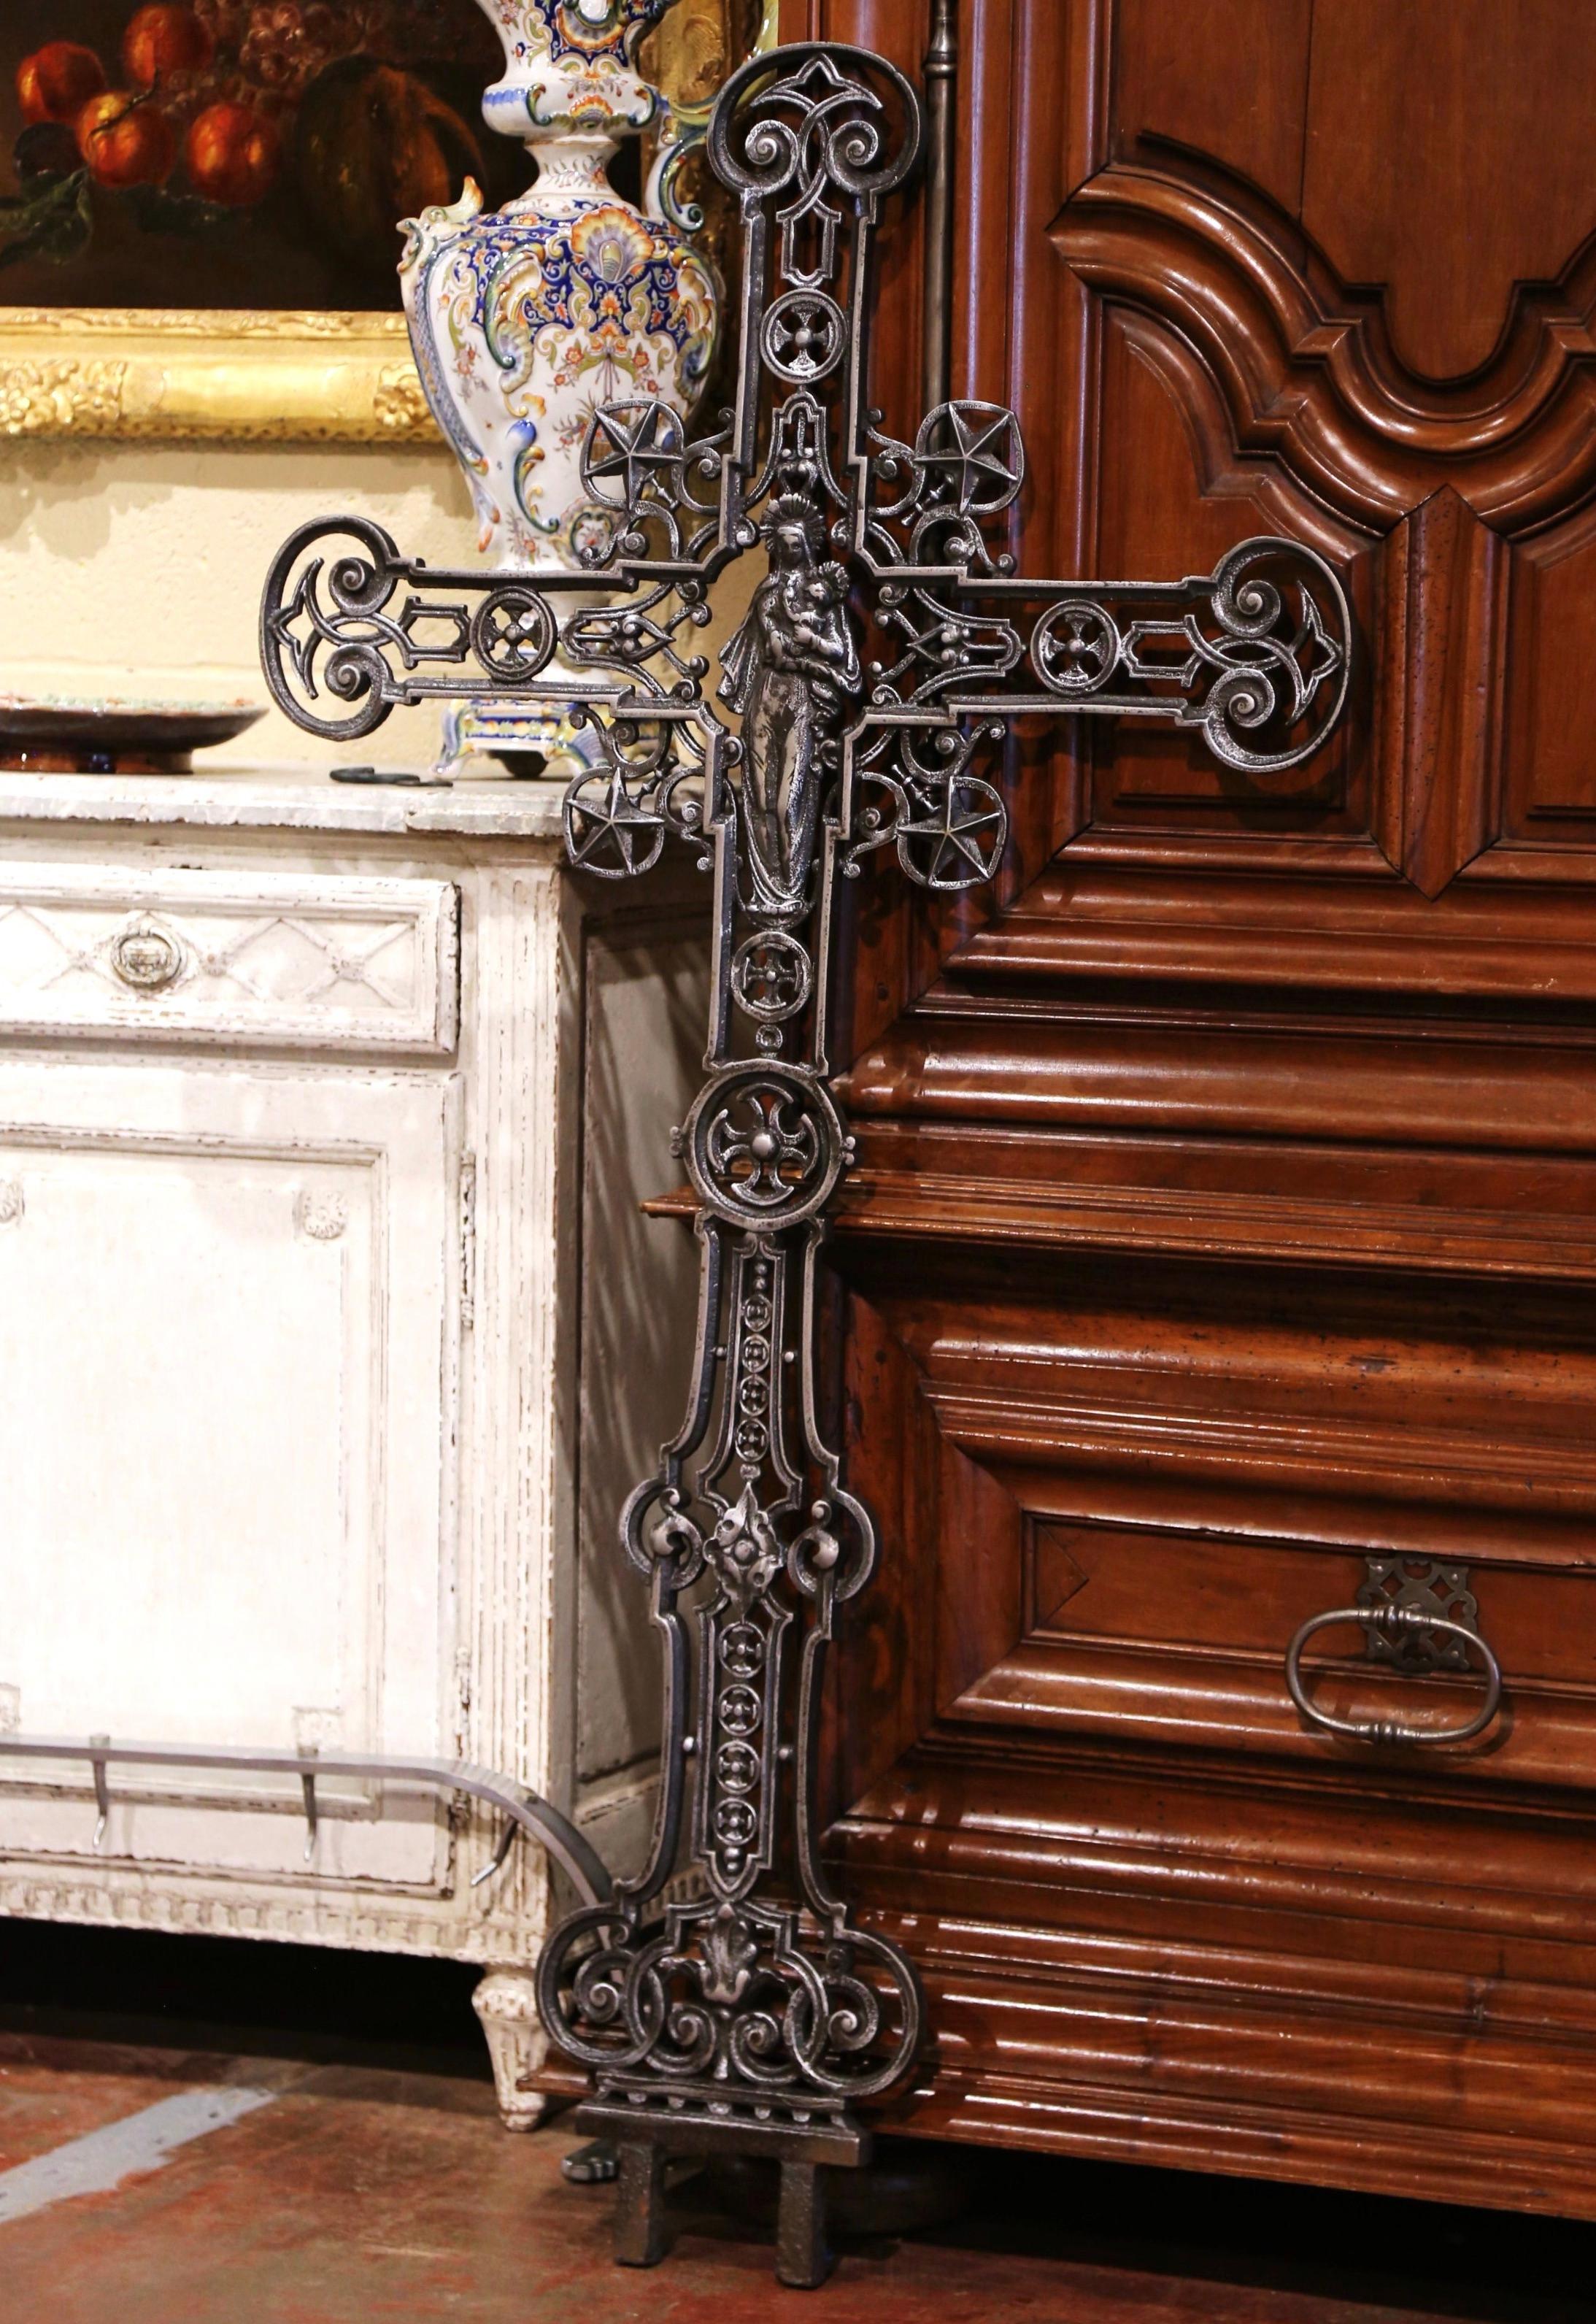 This beautiful antique cross was crafted in France, circa 1870. The large iron piece decorated with star and scroll motifs, is embellished in the center with a sculpture of Madonna holding the Child. The tall religious cross is in excellent